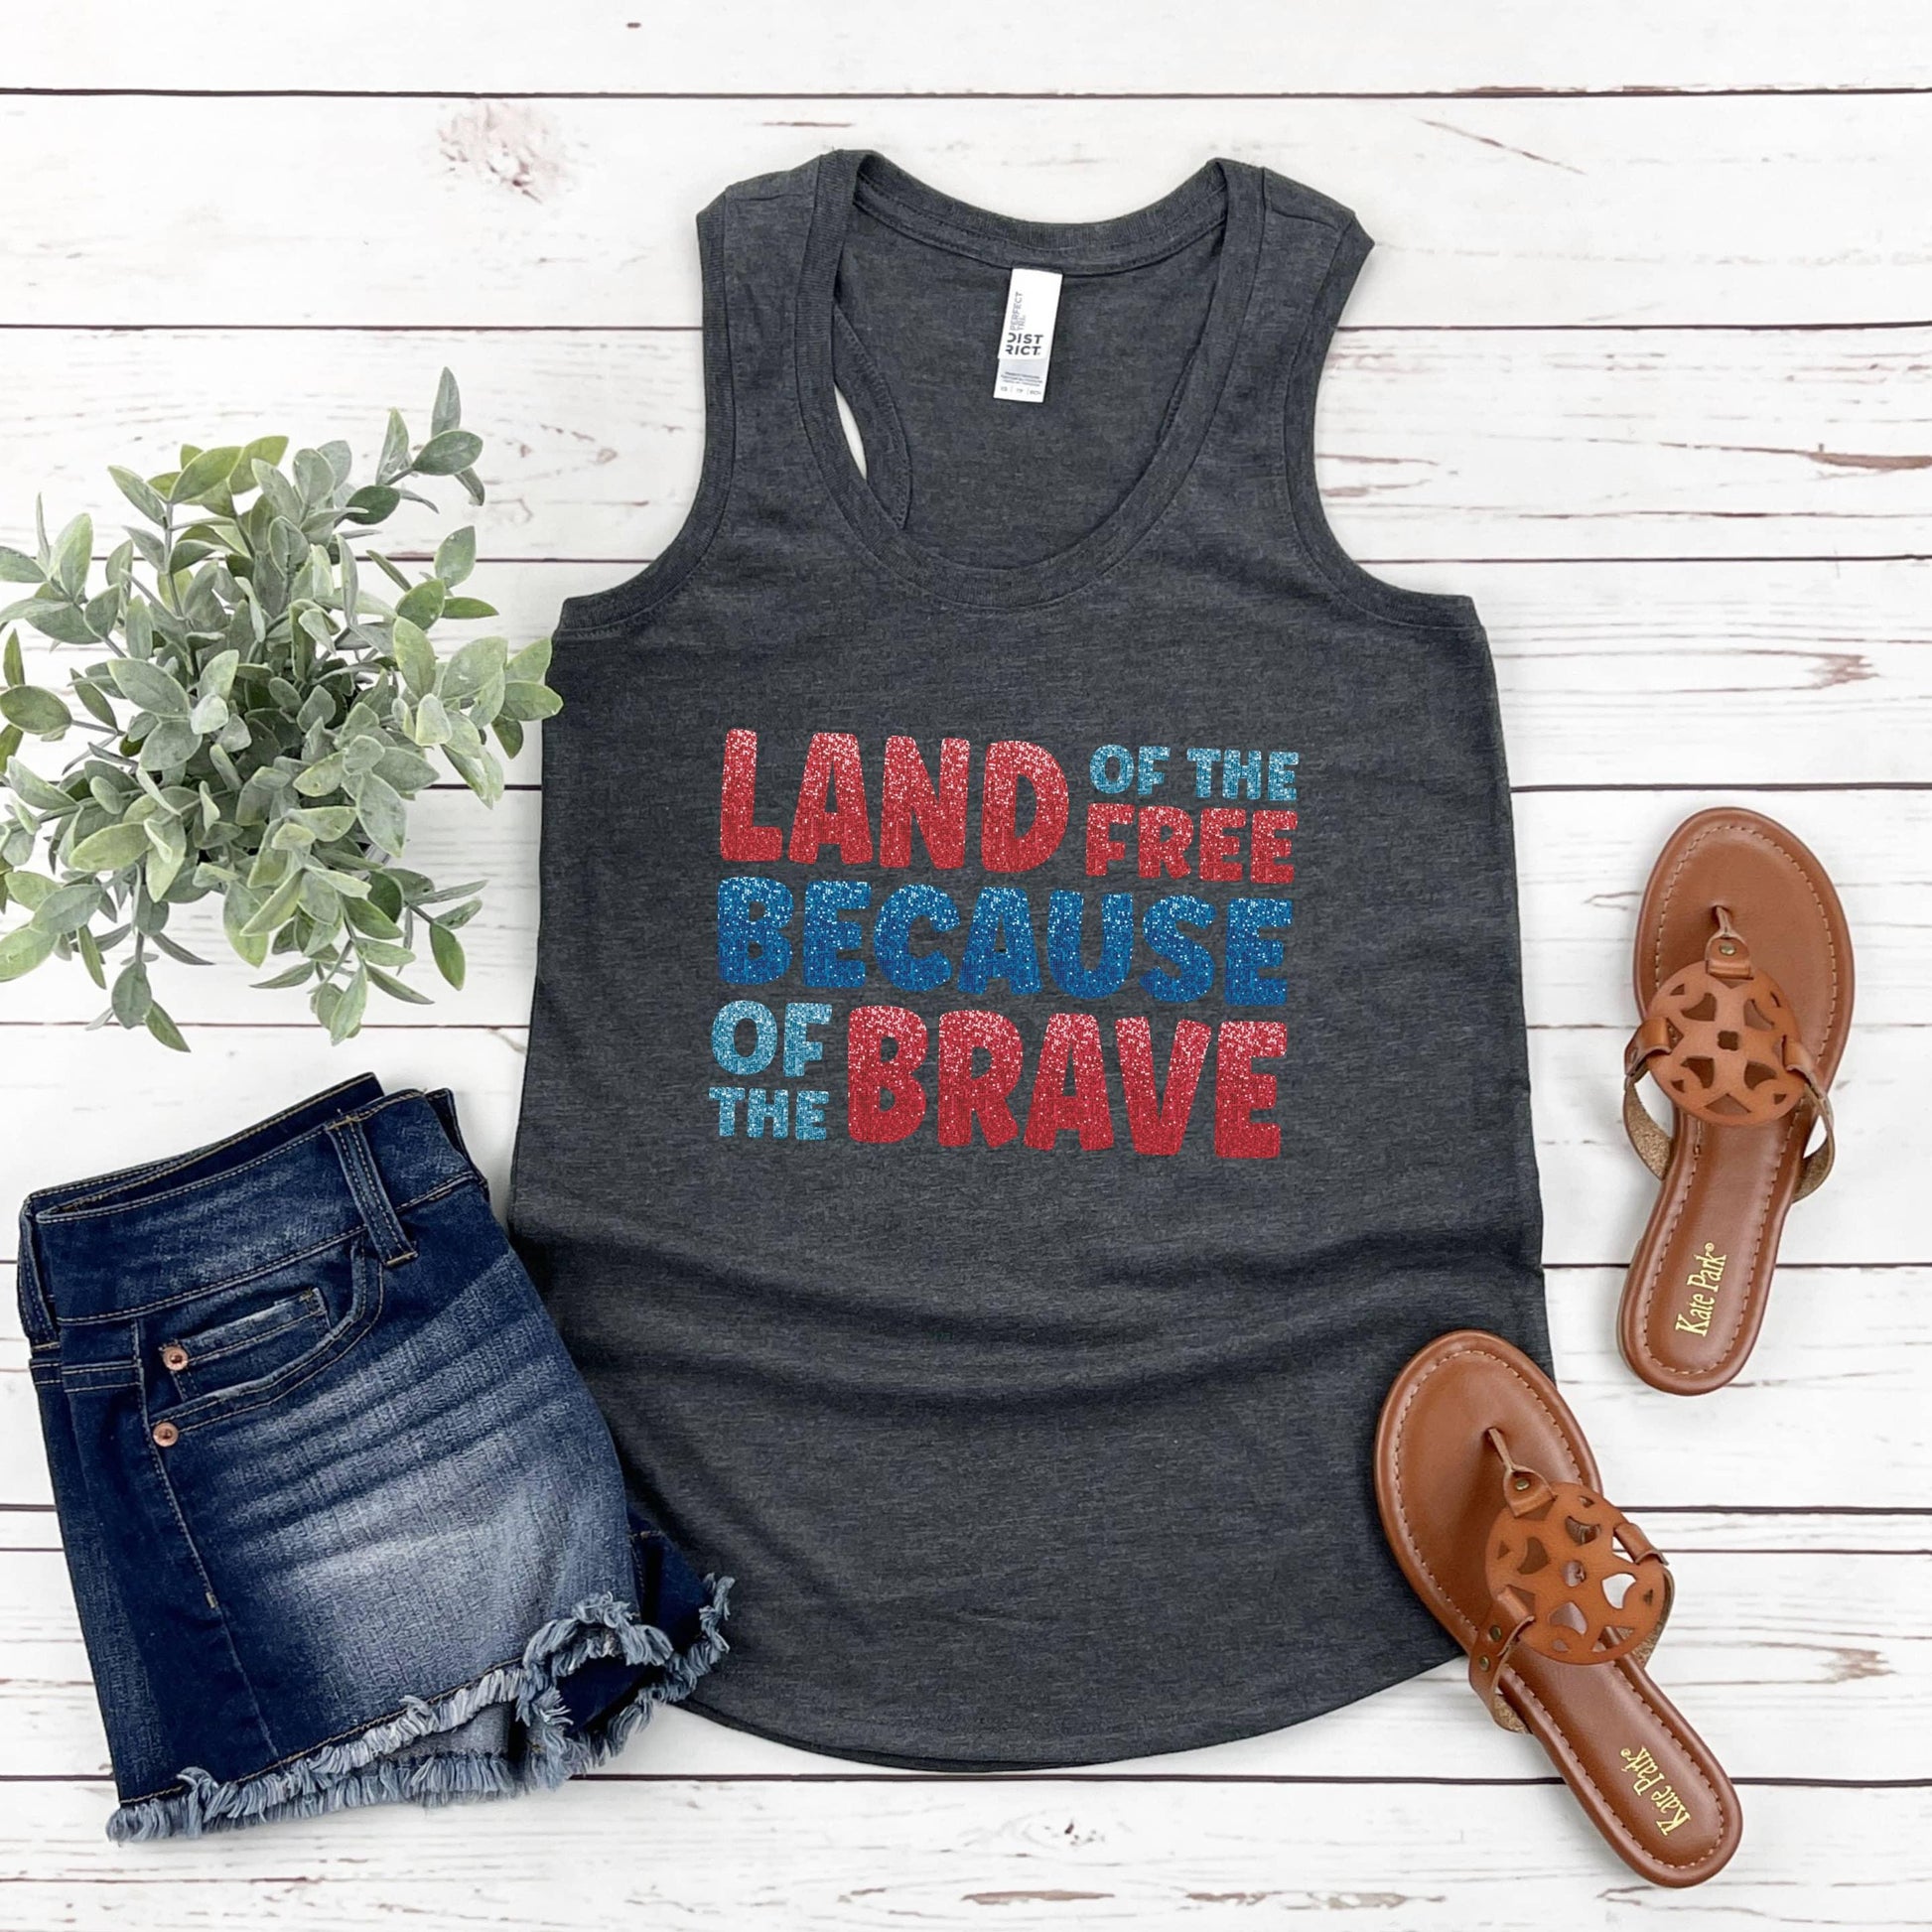 Land Of The Free Because Of The Brave Women’s Triblend Racerback Plus Tank - JT Footprint Apparel